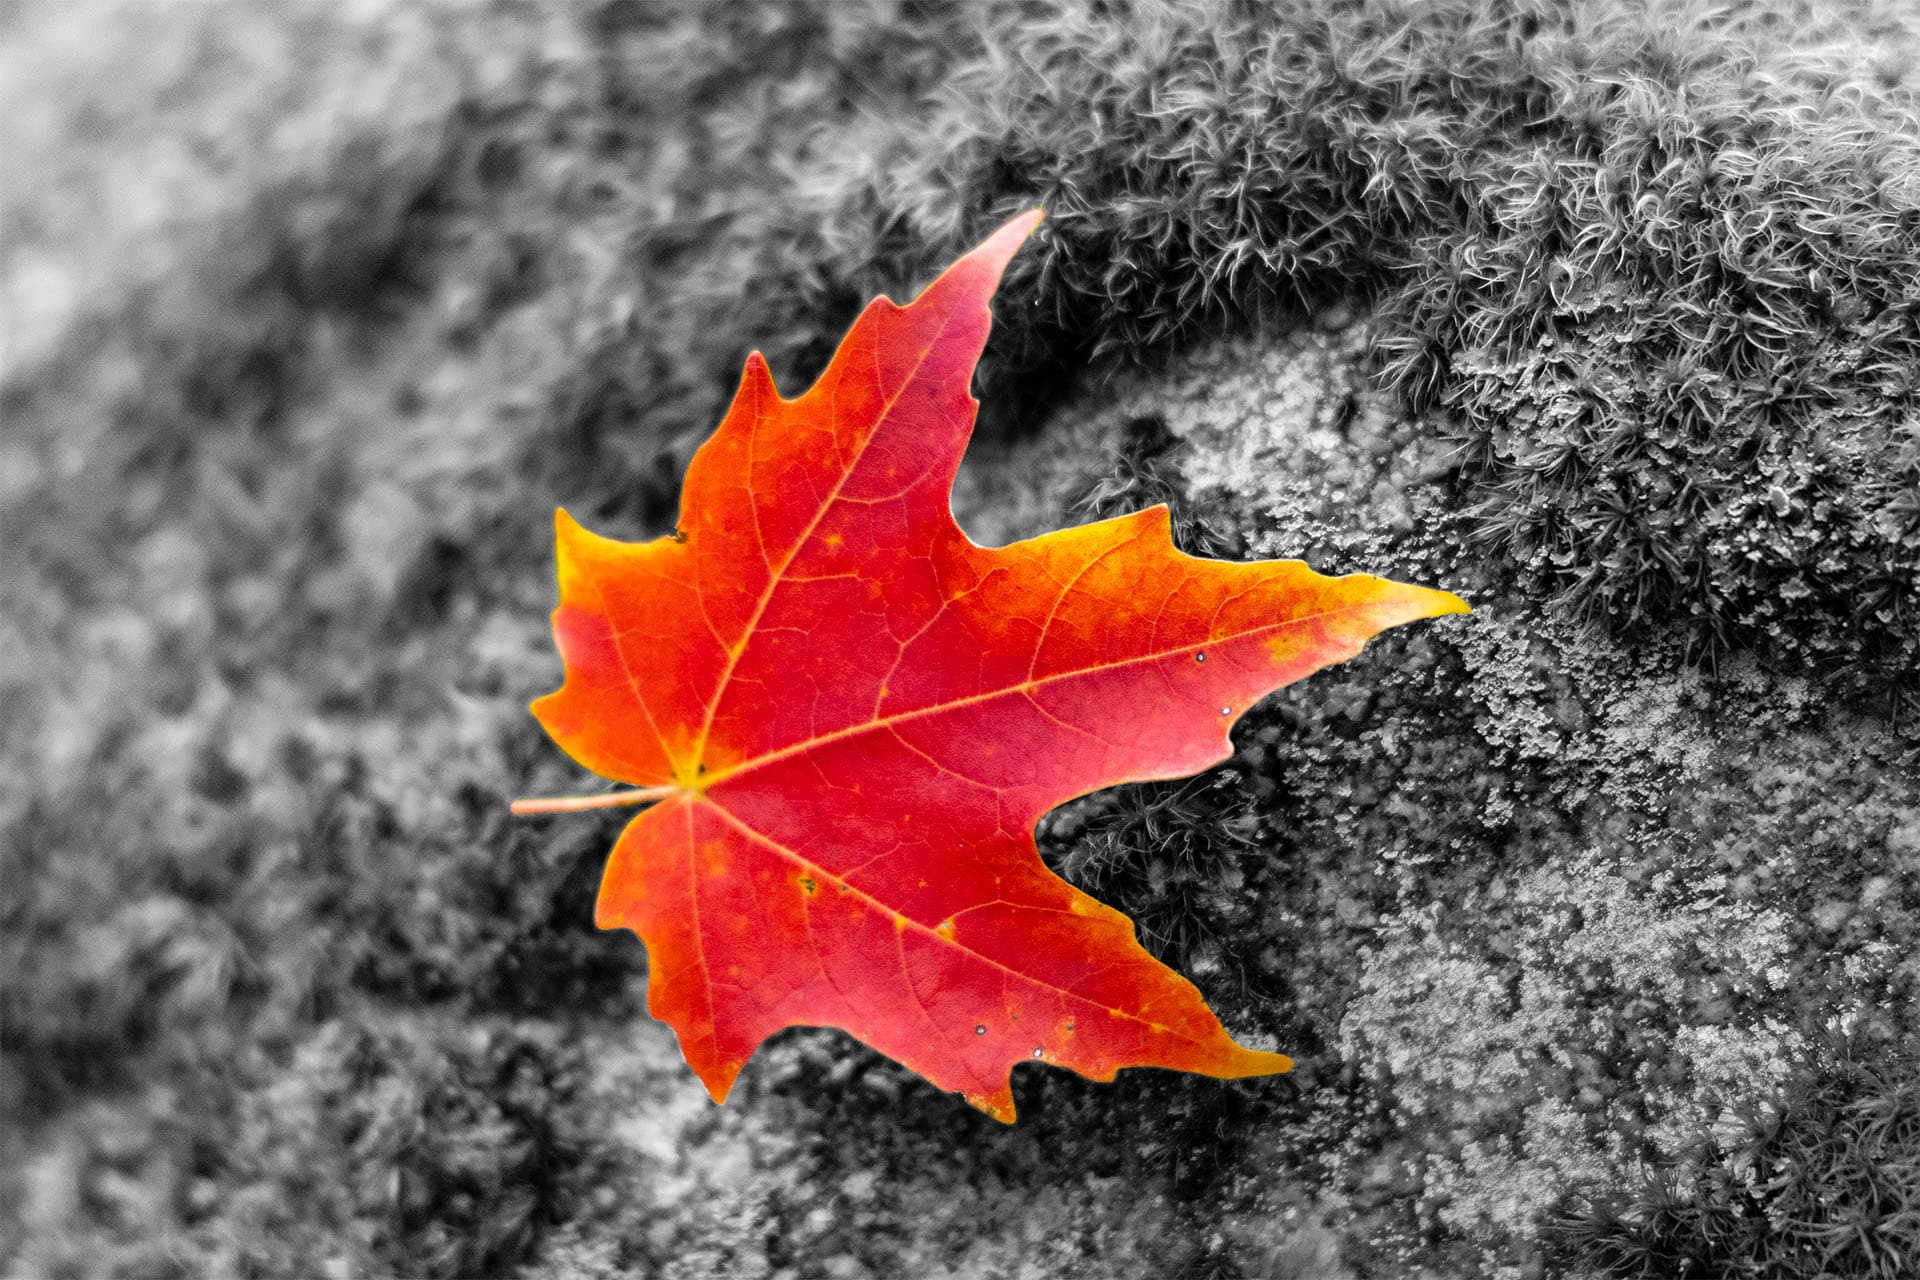 A photograph of an autumn colored maple leaf with the background in black and white